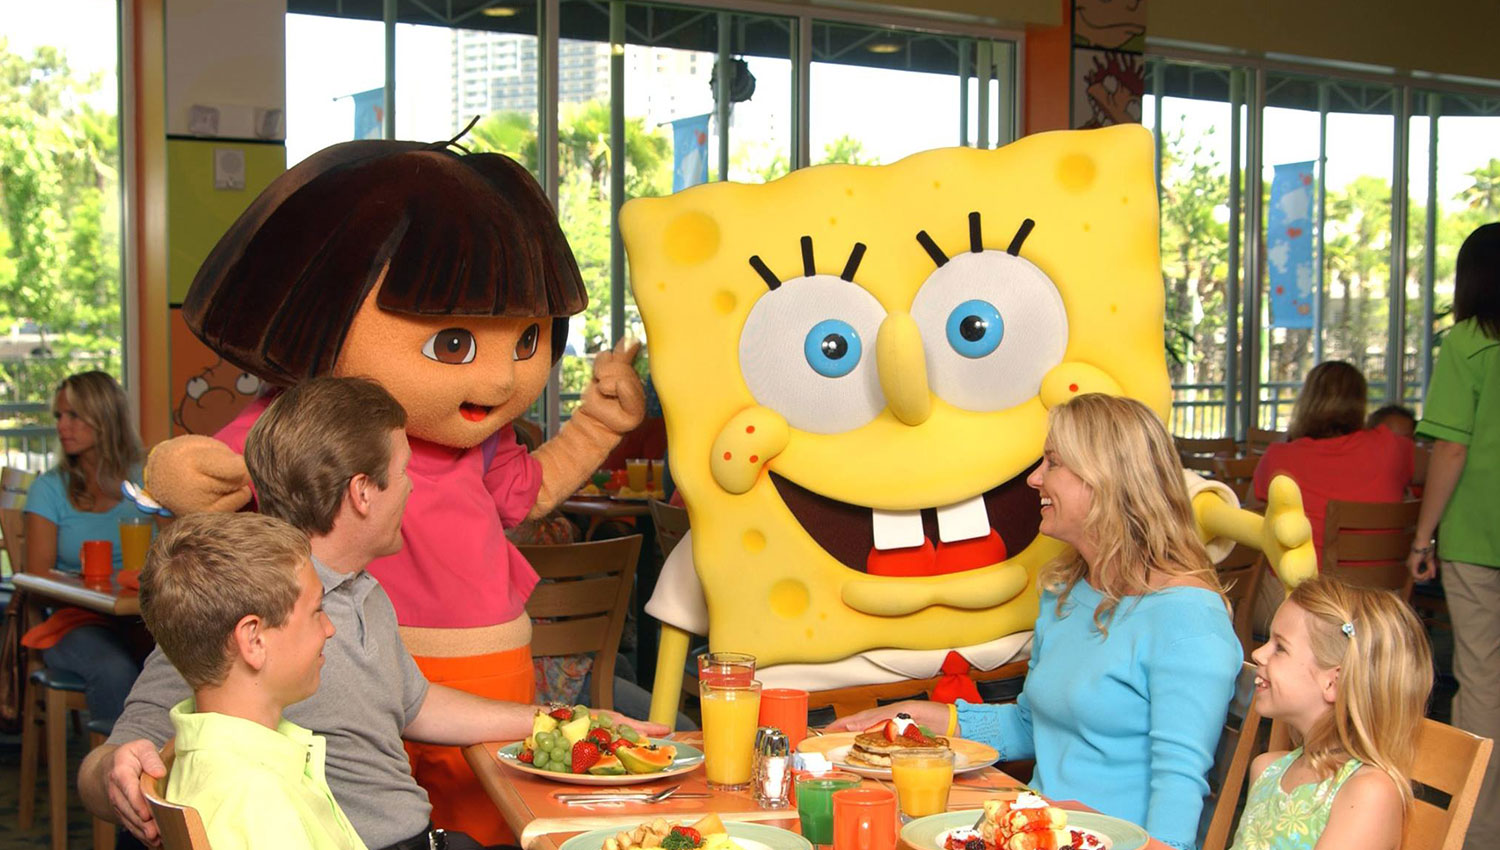 meet disney charaters while eating food with the family at a theme park